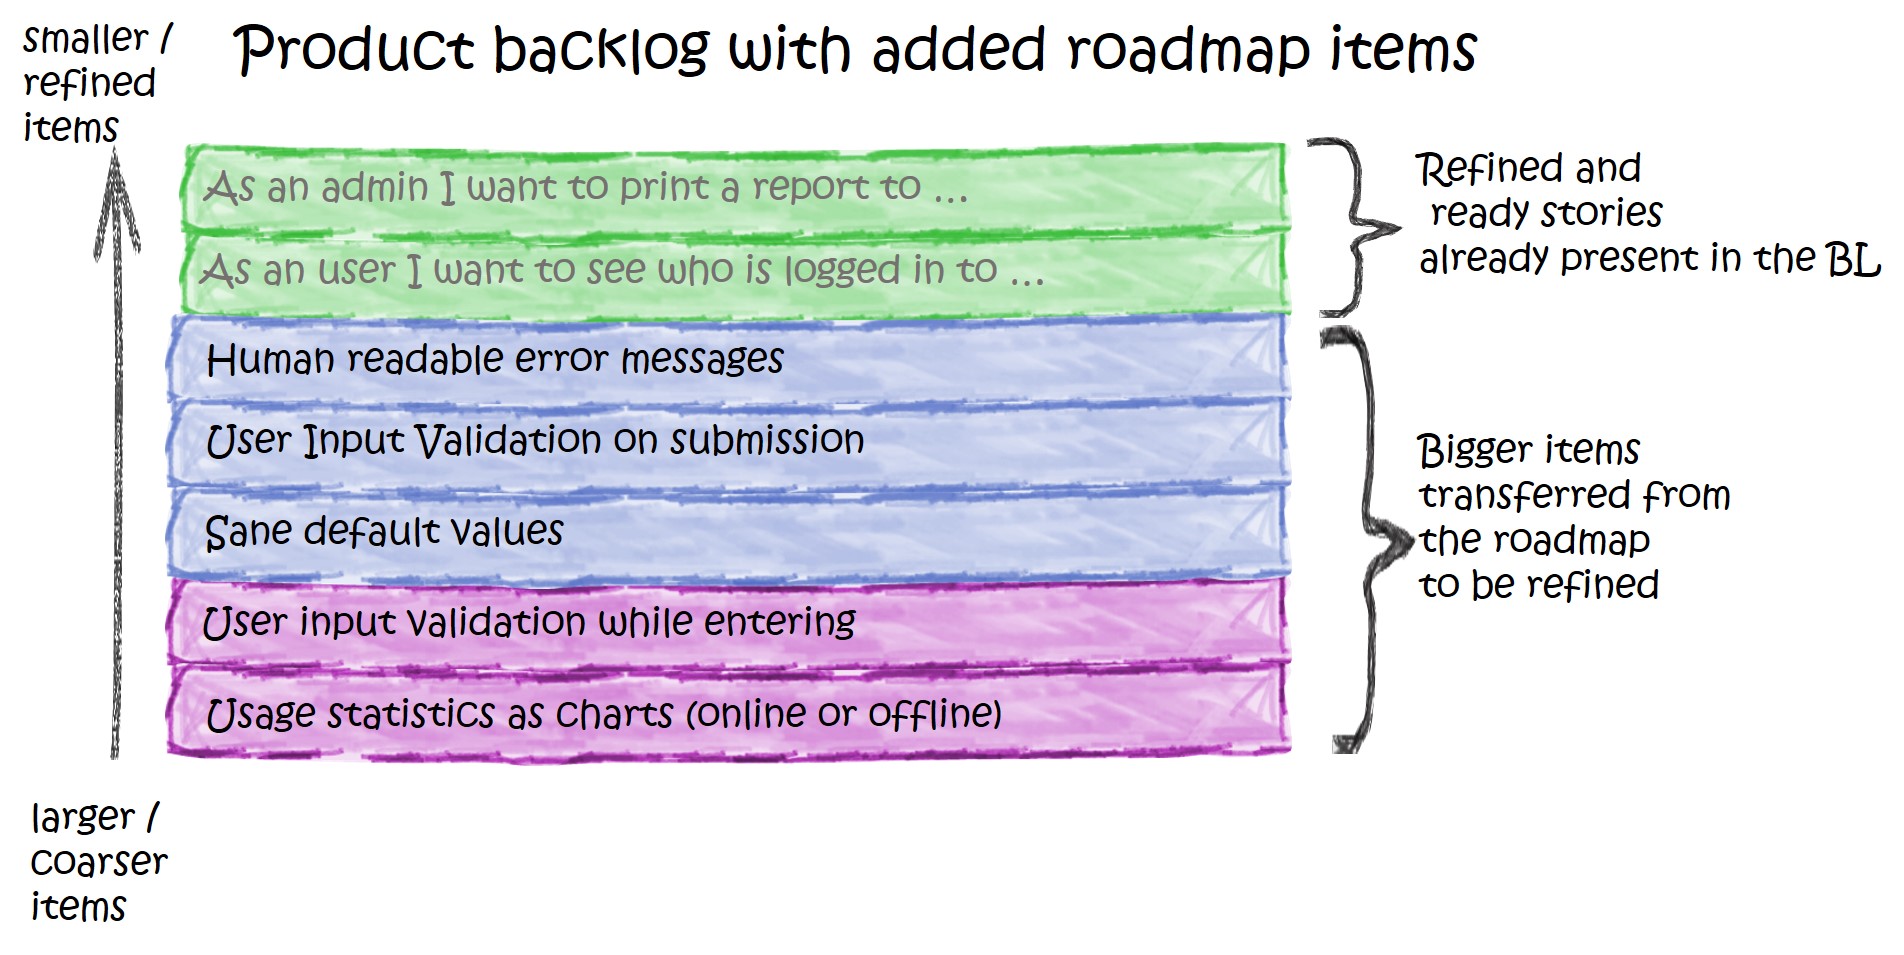 The product backlog containig the roadmap items